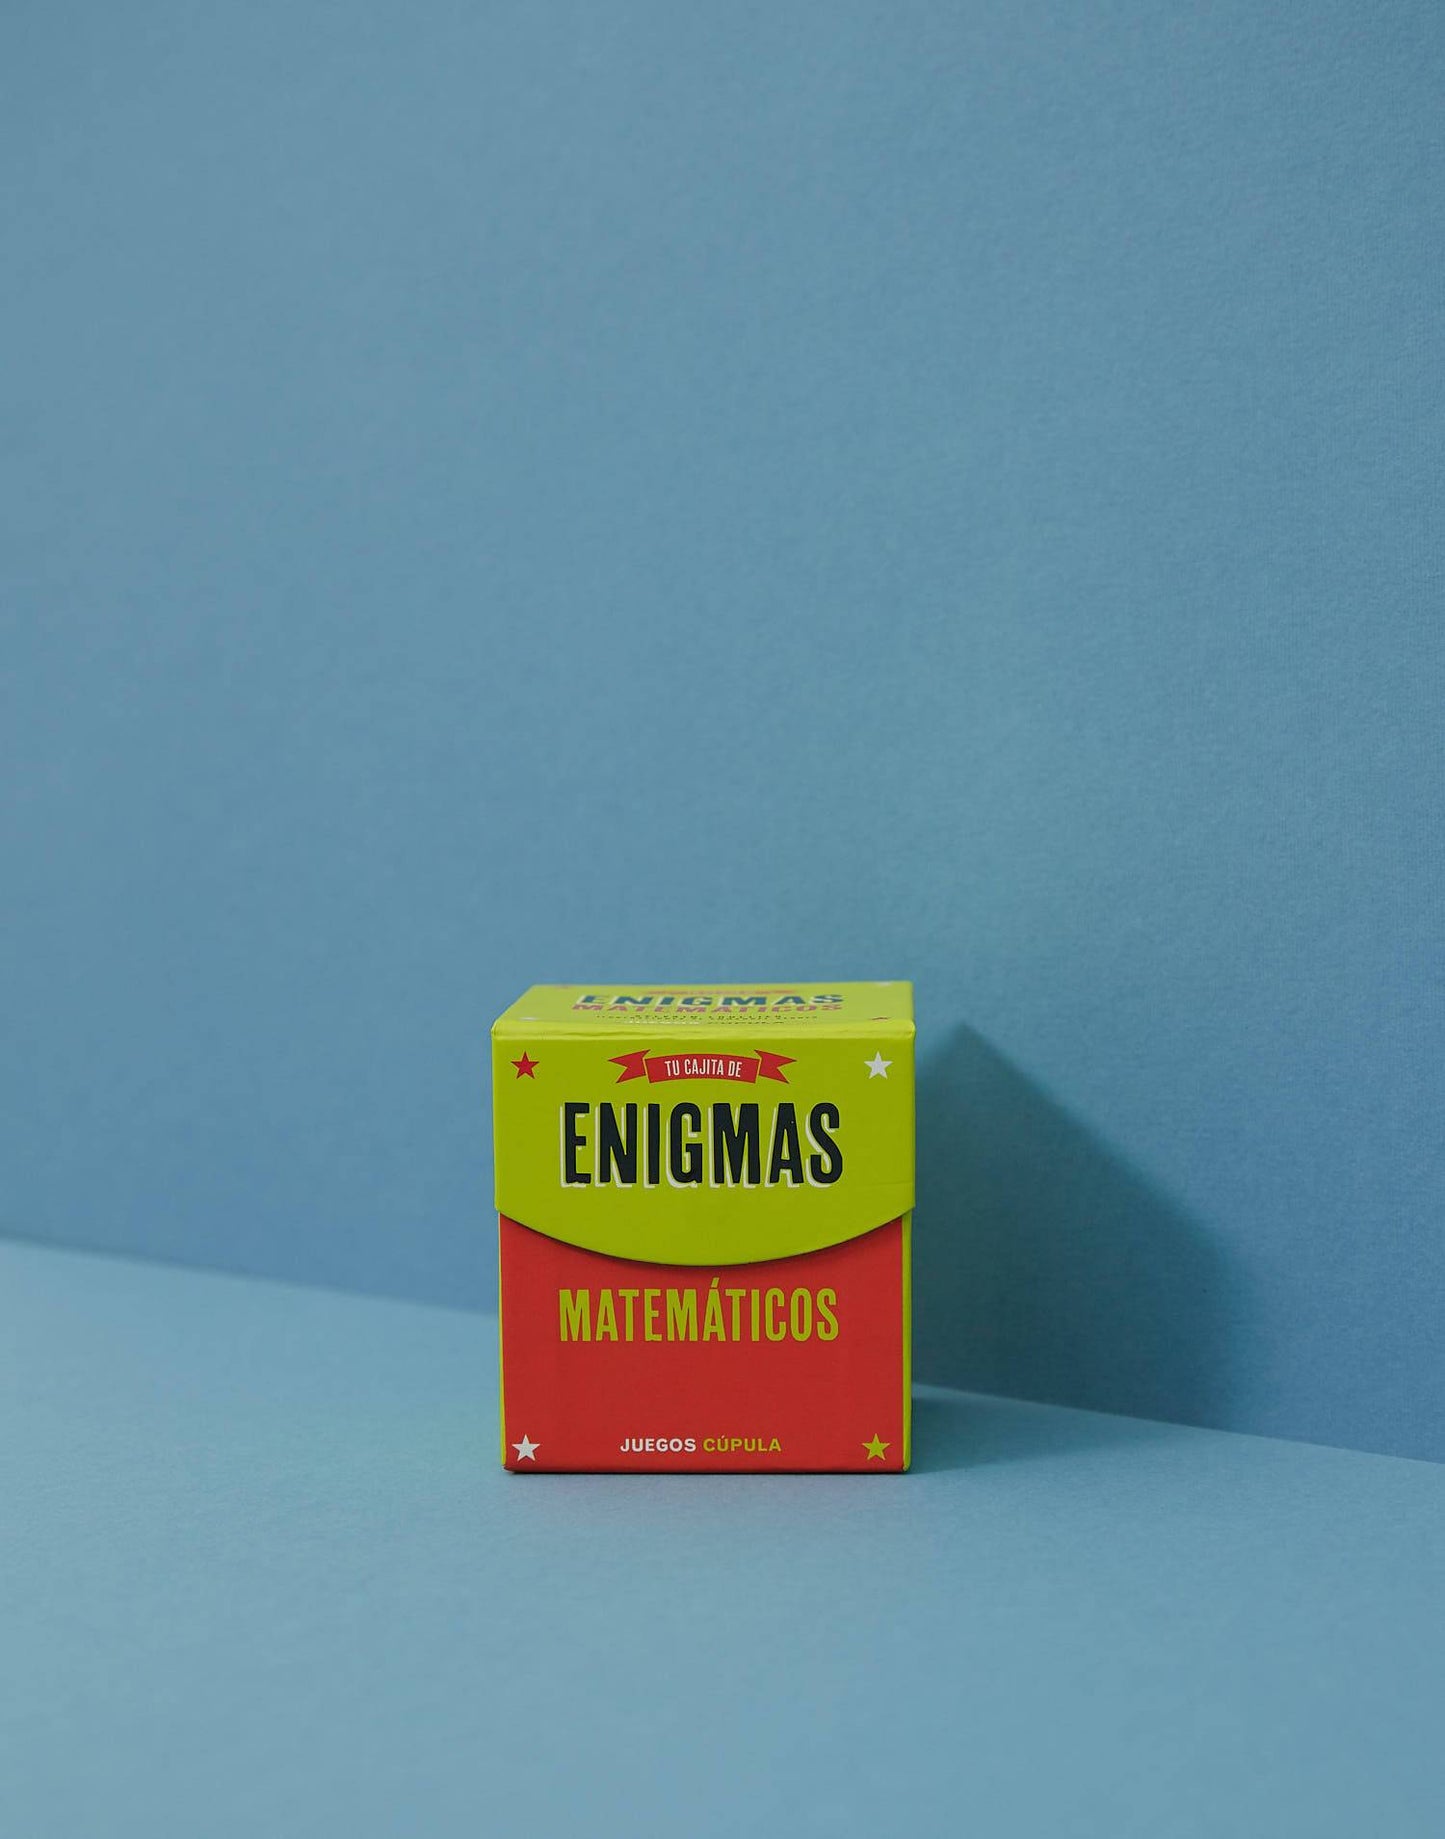 Game your mathematical enigmas box